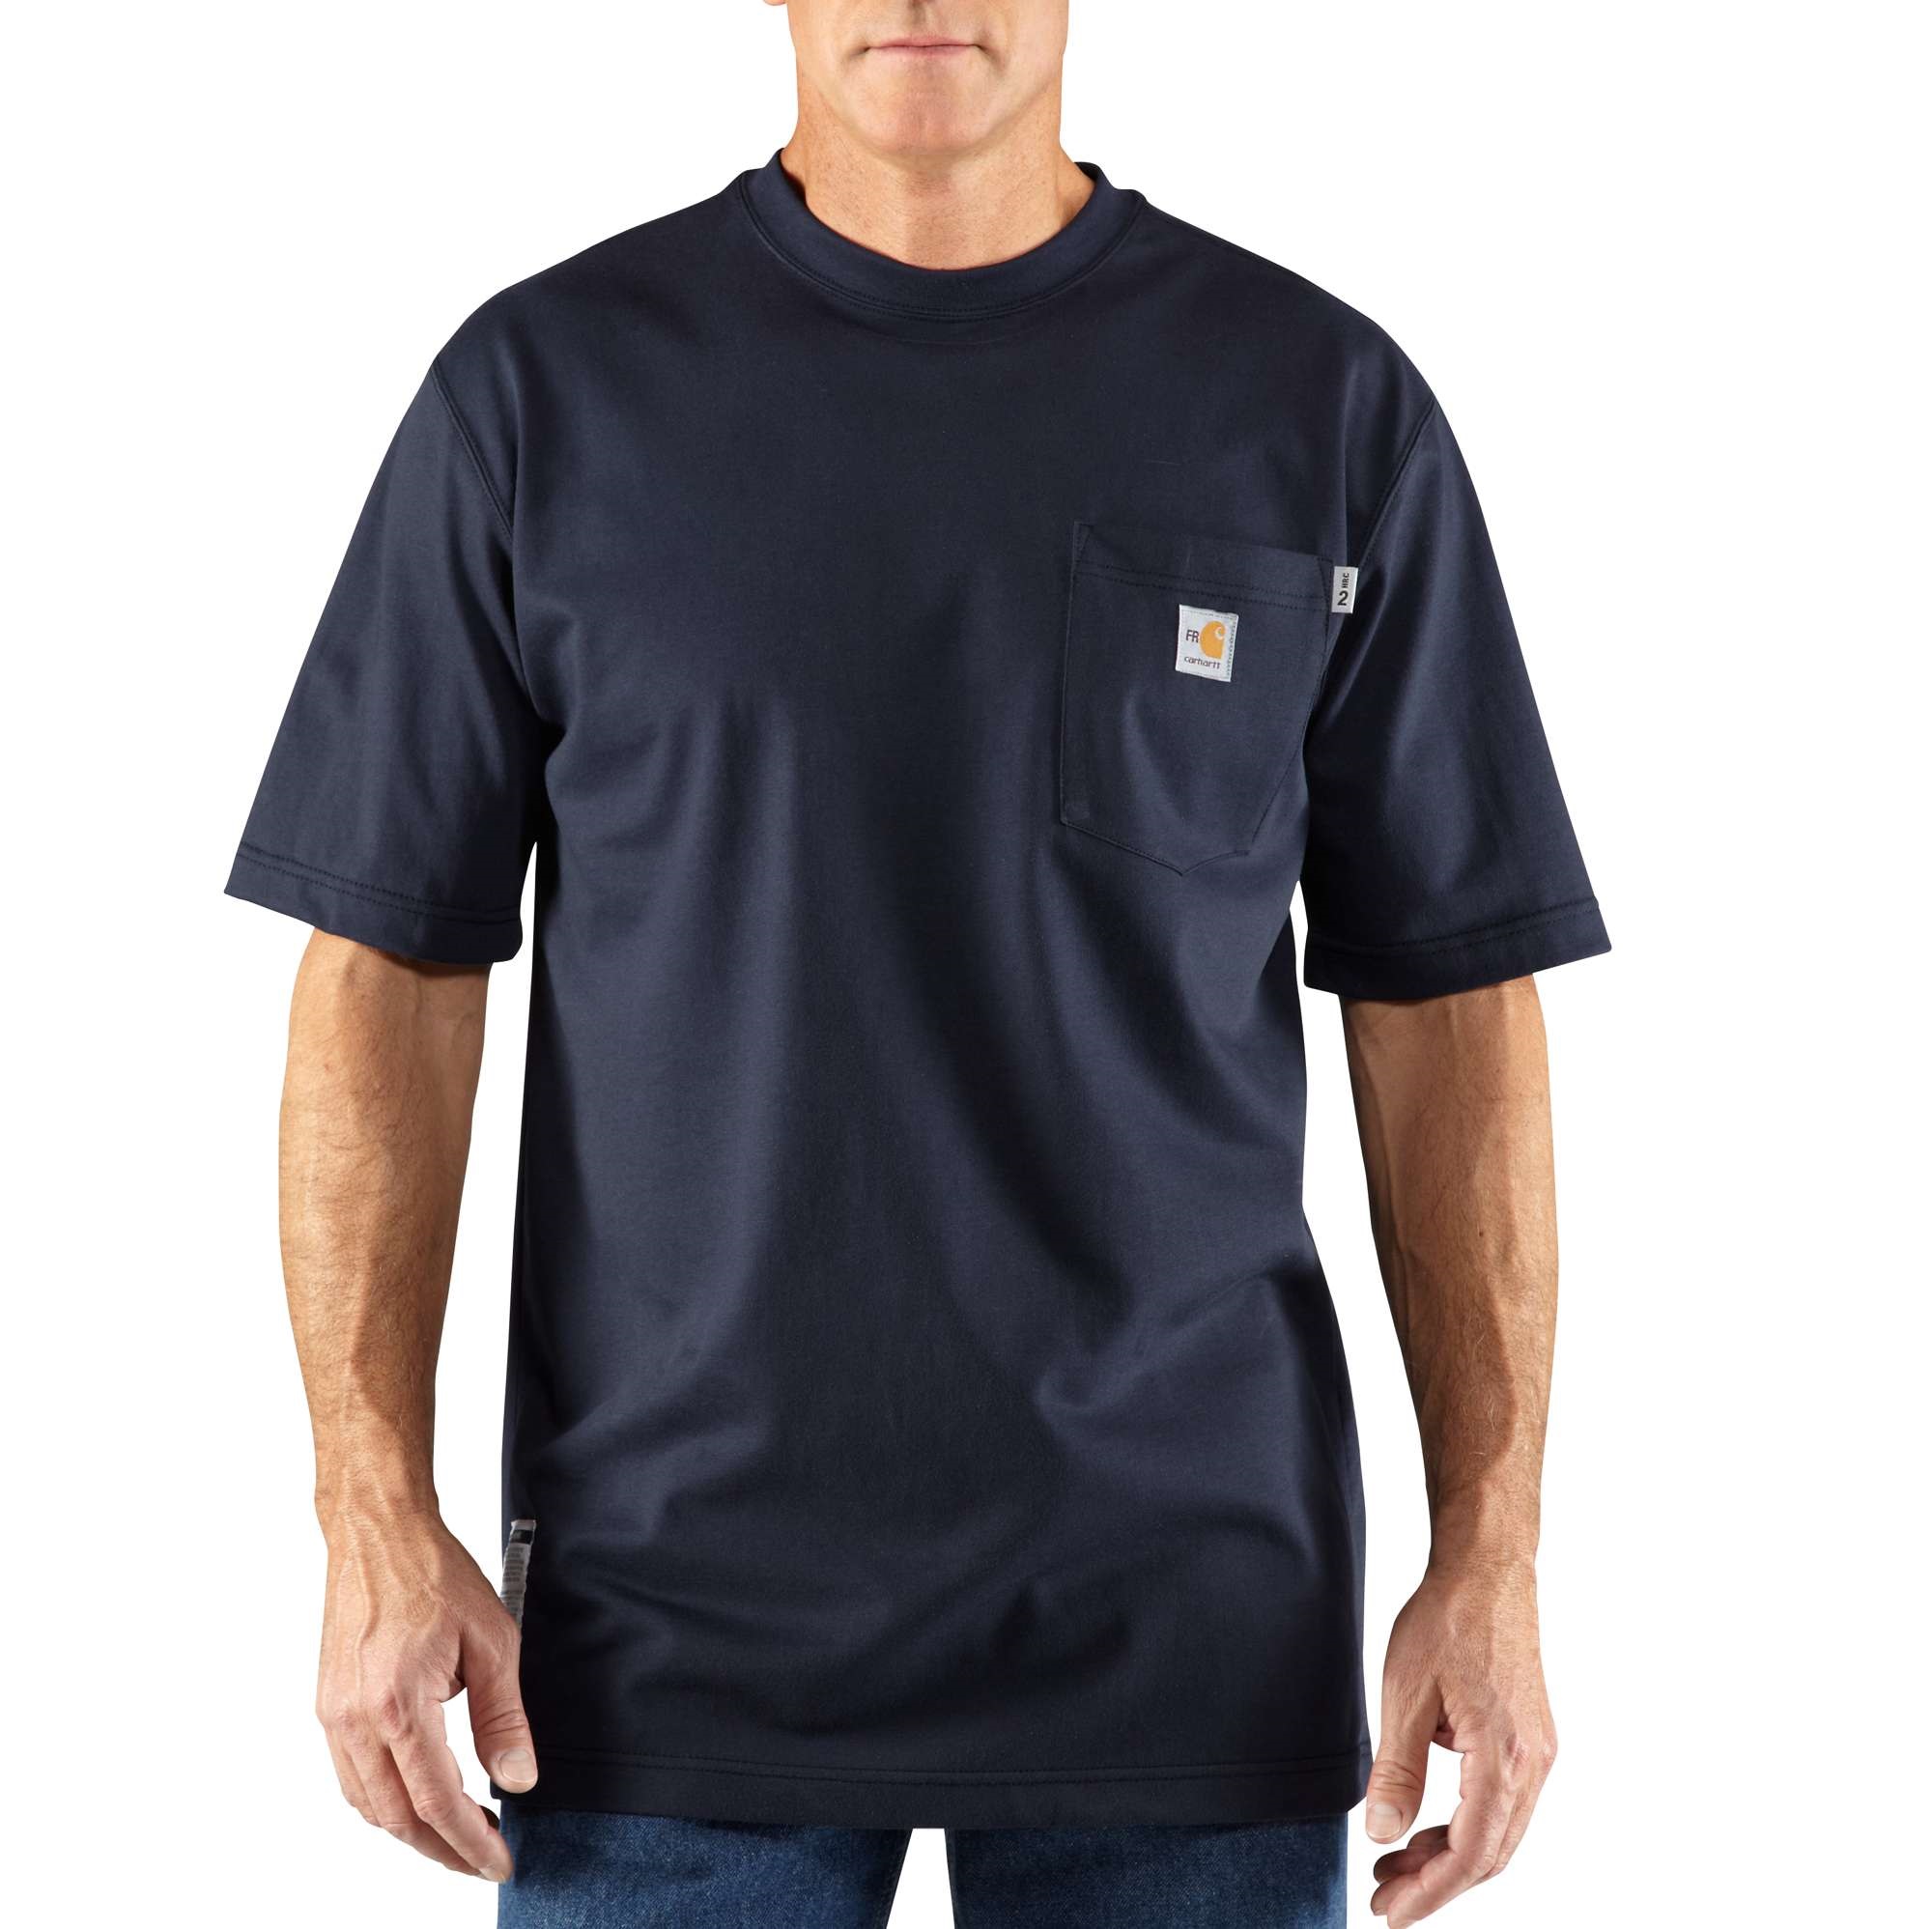 Carhartt Flame Resistant Cotton Short-Sleeve T-Shirt in navy